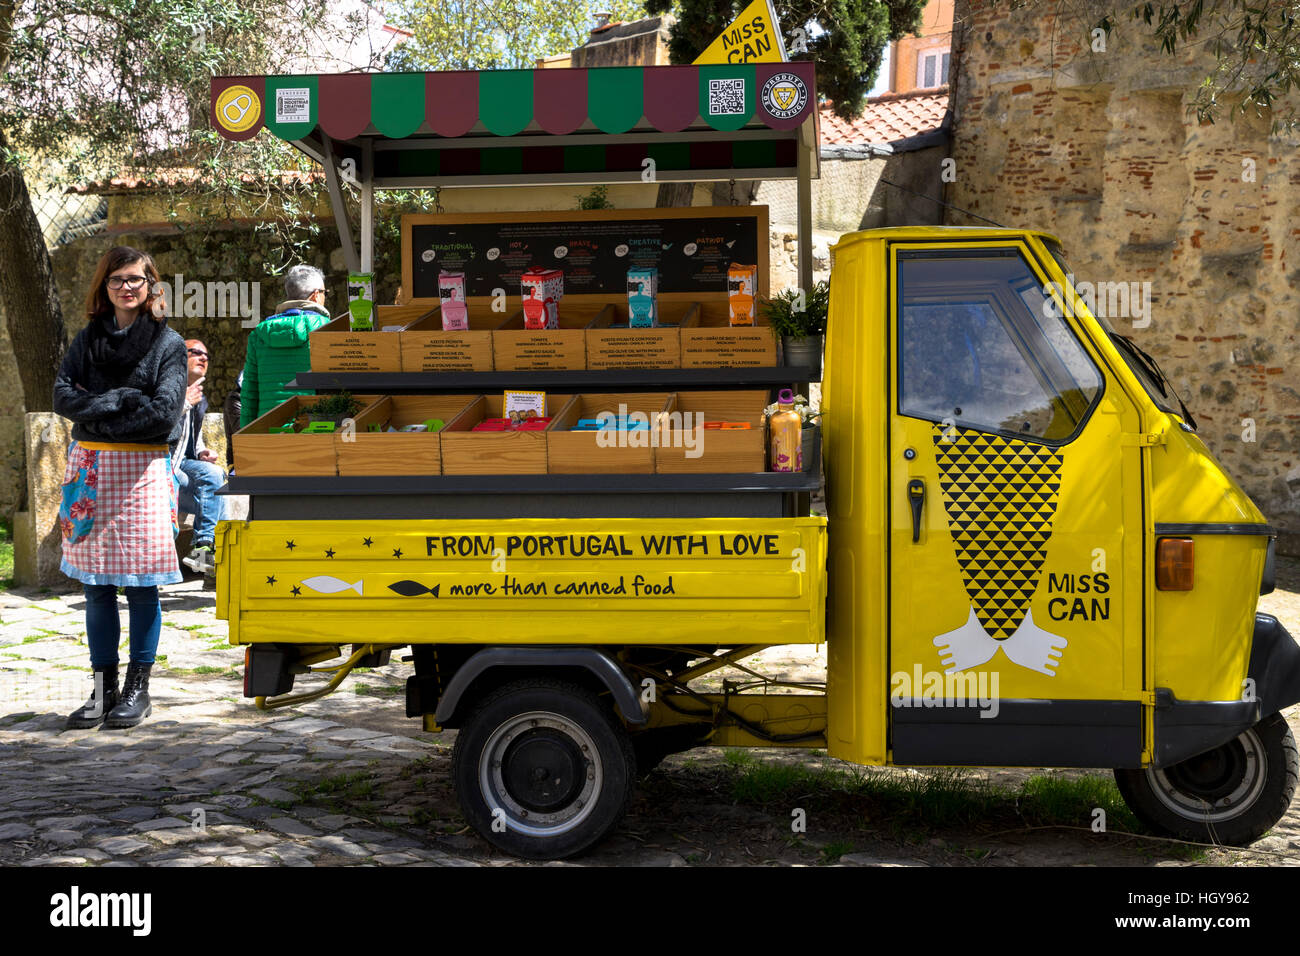 Miss Can" standing by her bright yellow tuk tuk food van selling her famous  Portuguese tinned sardines in Lisbon Portugal Stock Photo - Alamy